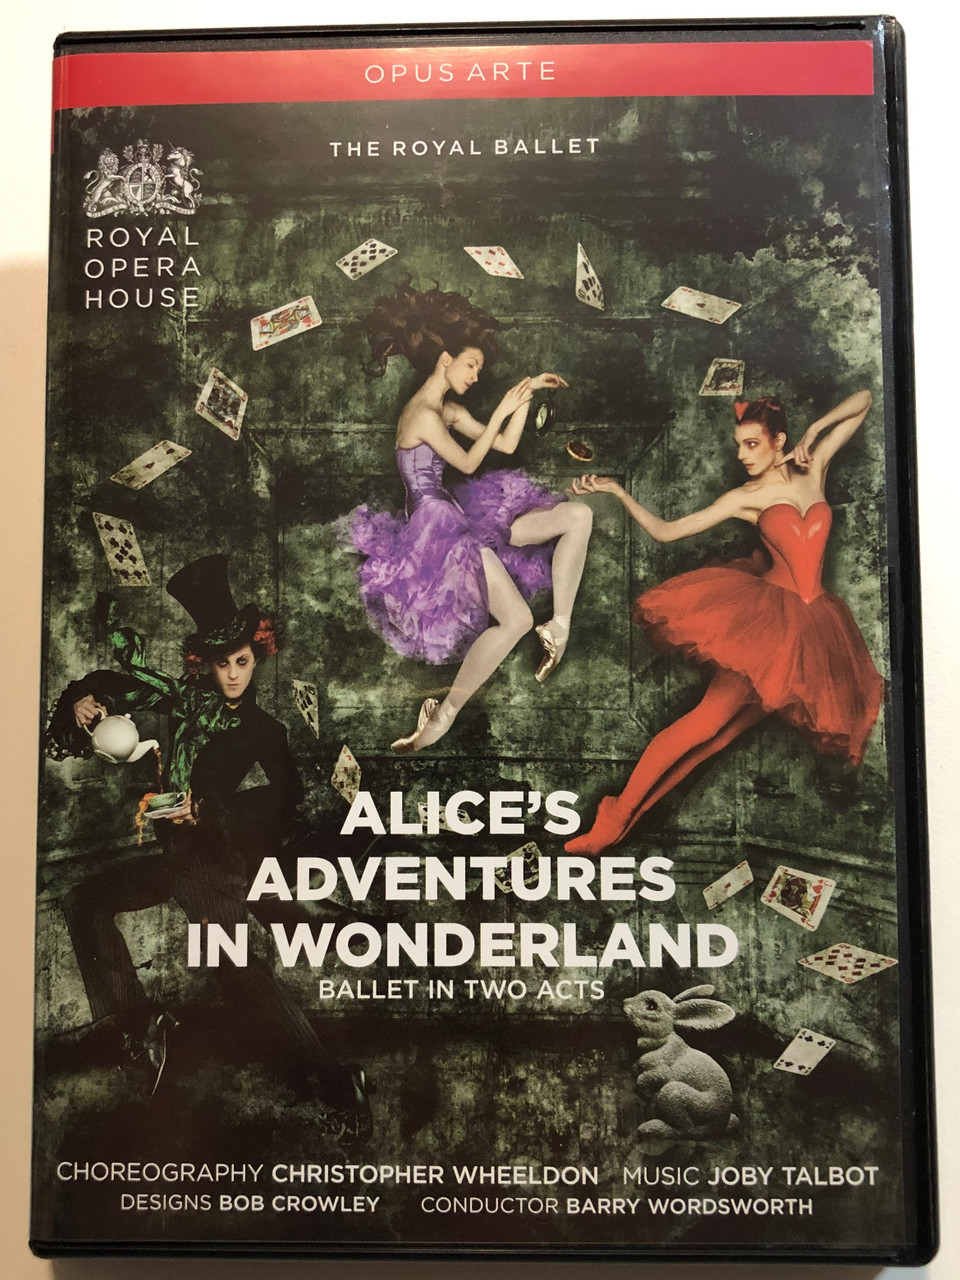 Alice's Adventures in Wonderland DVD 2011 Ballet in two acts / The Royal  Ballet - Conducted by Barry Wordsworth / Directed by Jonathan Haswell /  Royal Opera House - BBC / Opus Arte - bibleinmylanguage